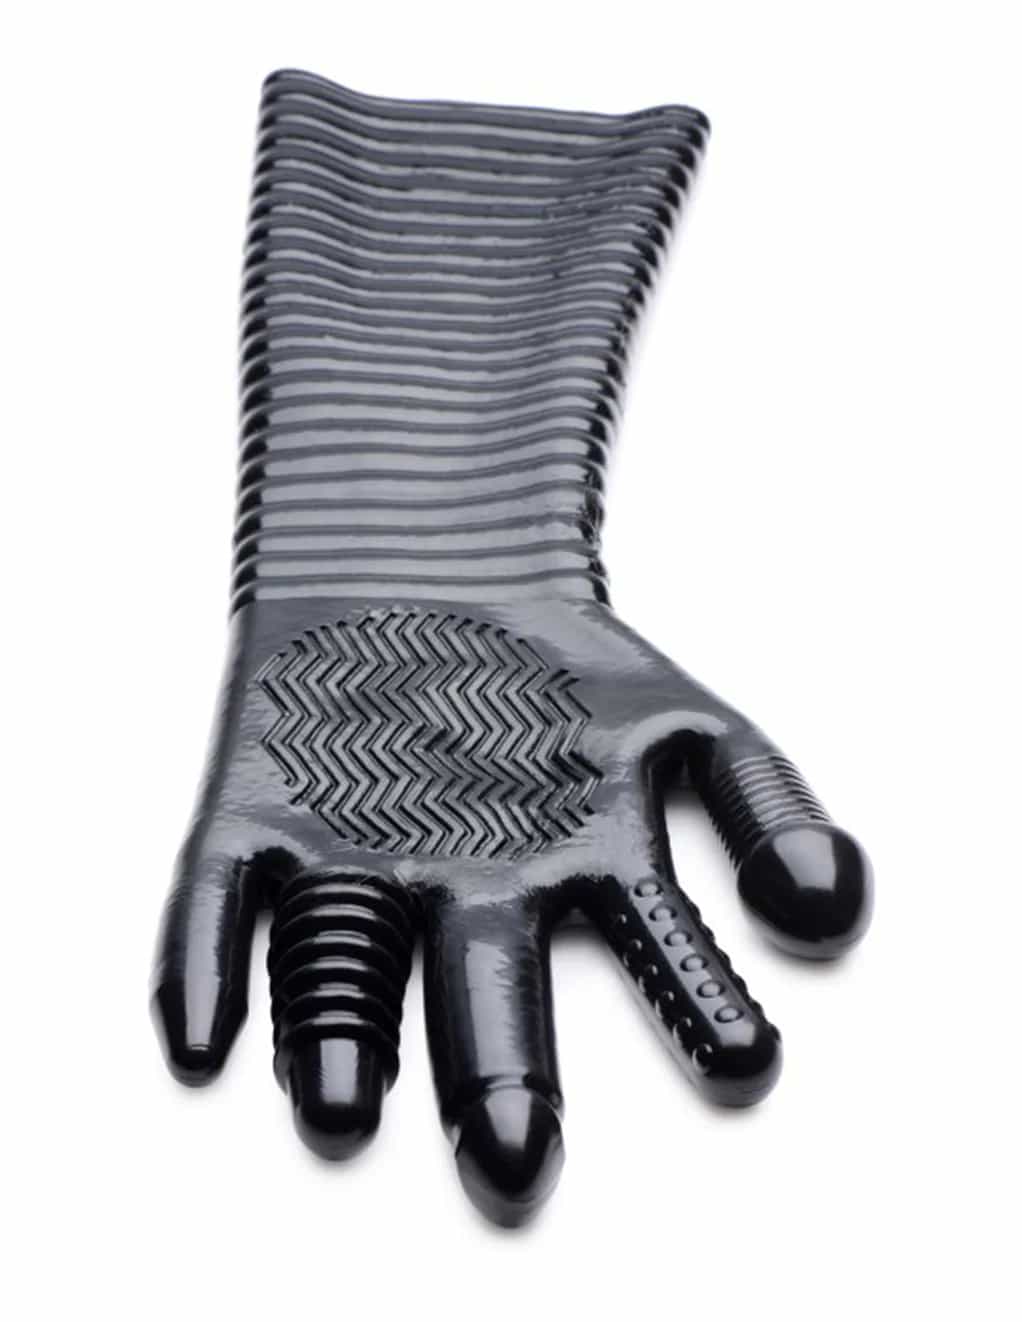 Product Pleasure Fister Textured Glove